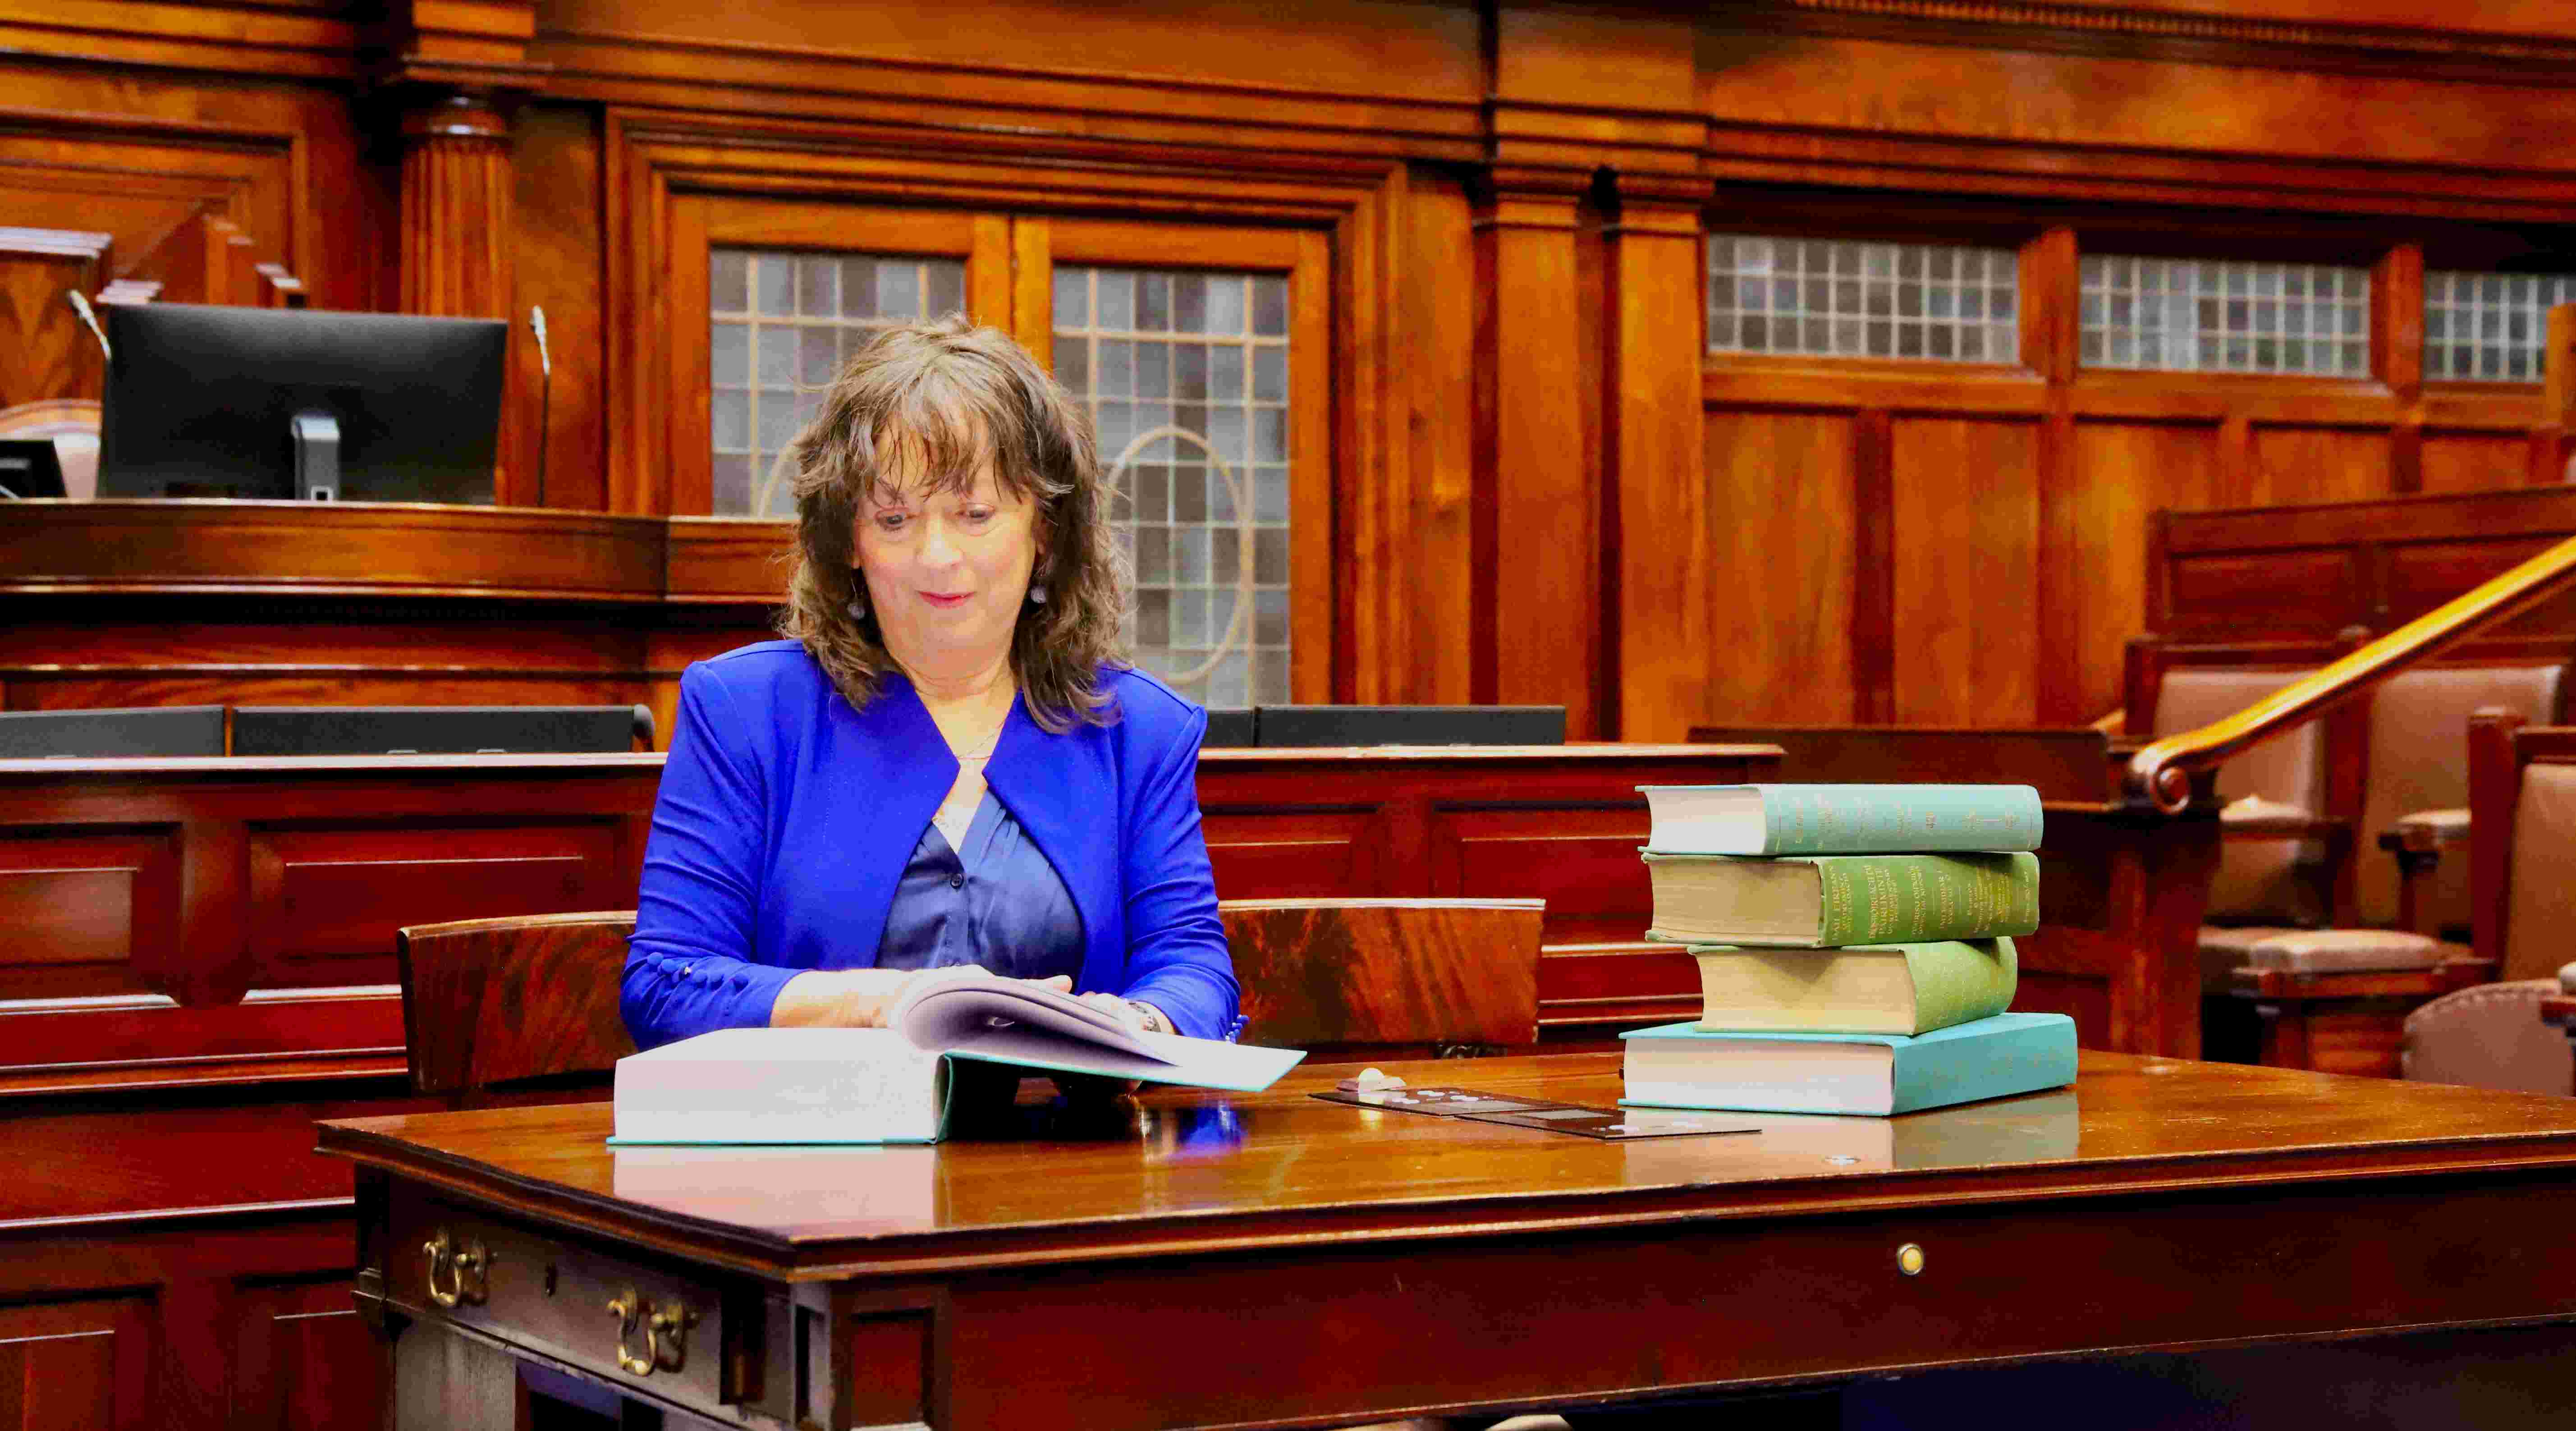 The Editor of Debates and Chief Report examines a copy of the 1,000th bound volume of the Official Report sitting at the reporters' desk in the Dáil Chamber